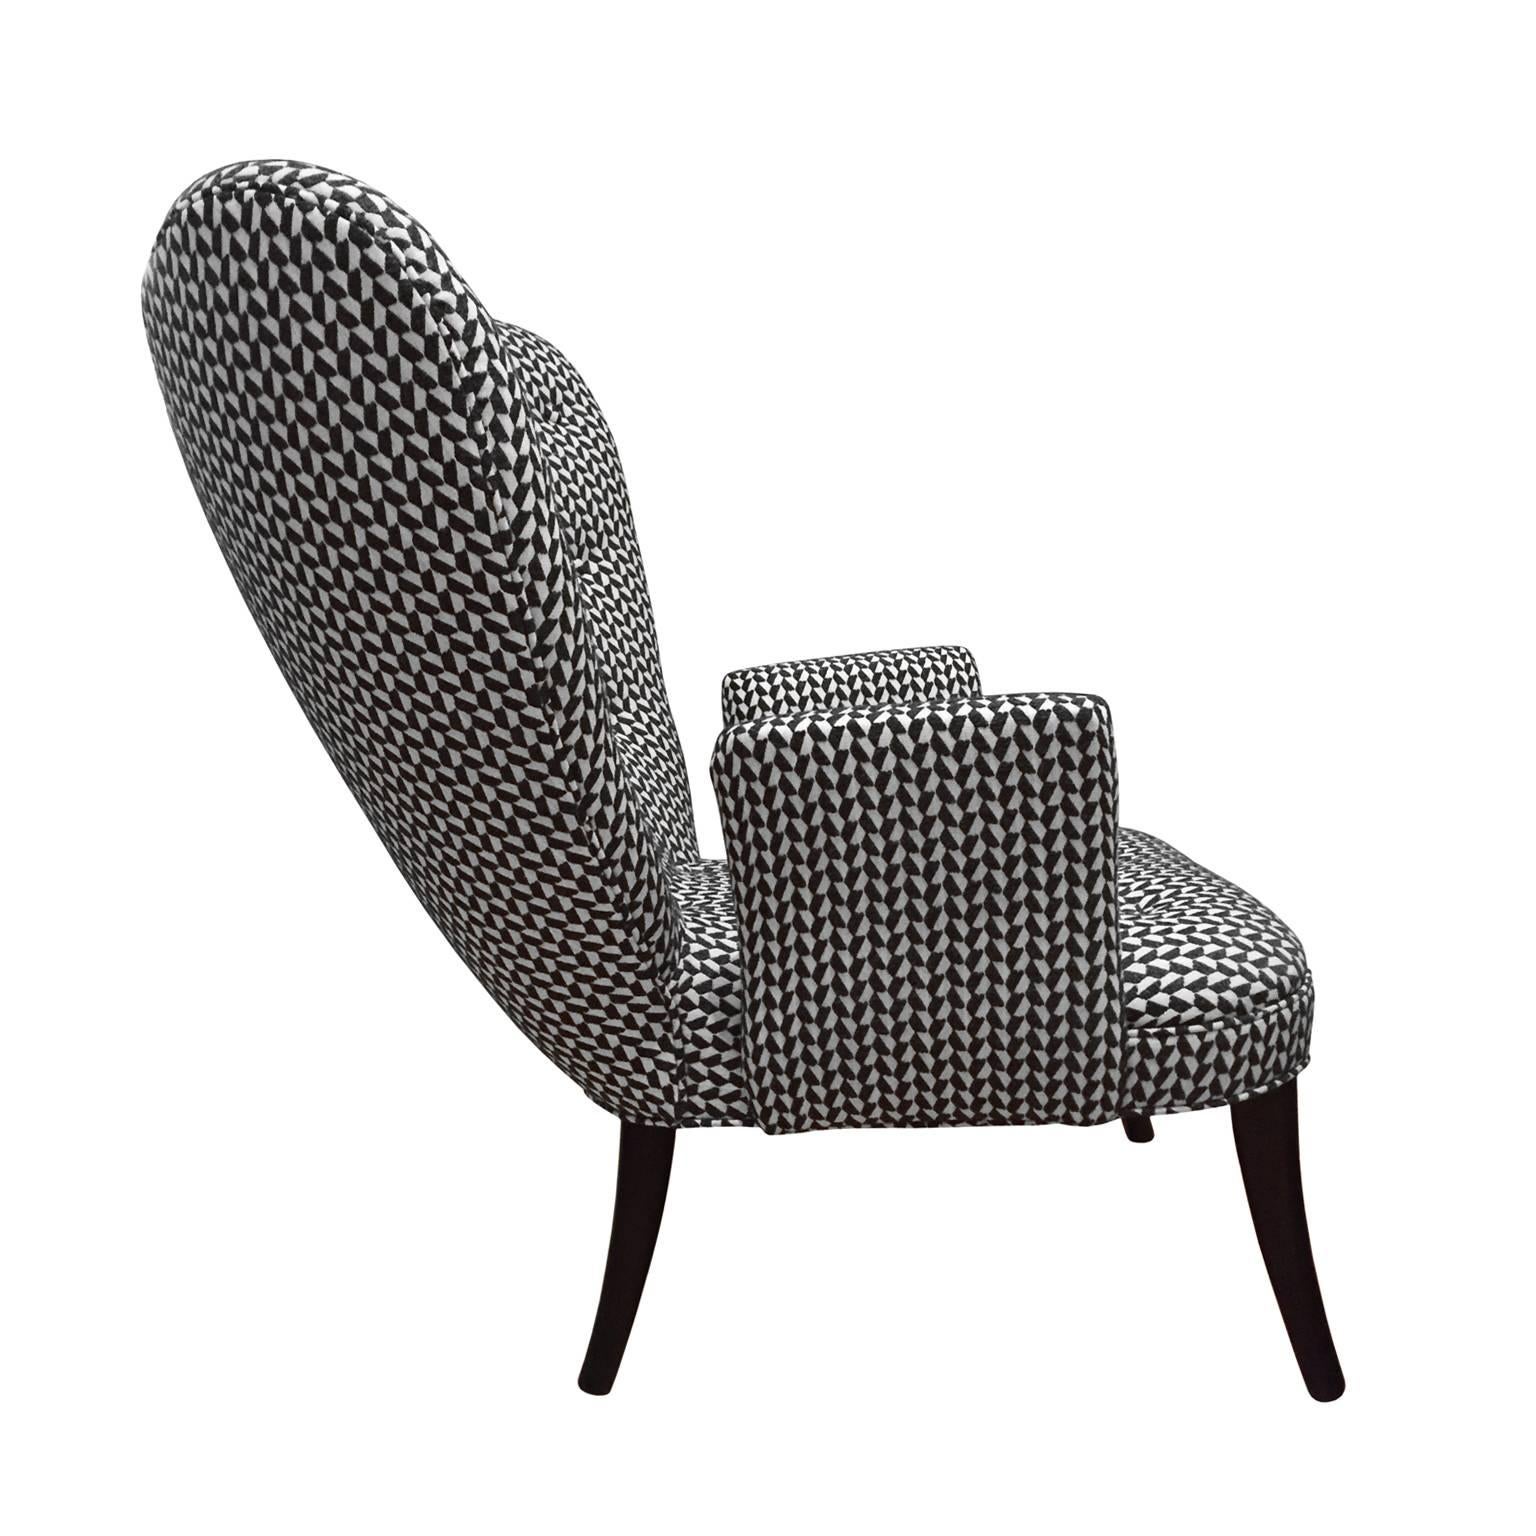 Flair Home collection custom Paolo chair in a black and white textured twill upholstery. Based on the elegant lines of a 1950s Italian armchair.

Pair available, priced individually.